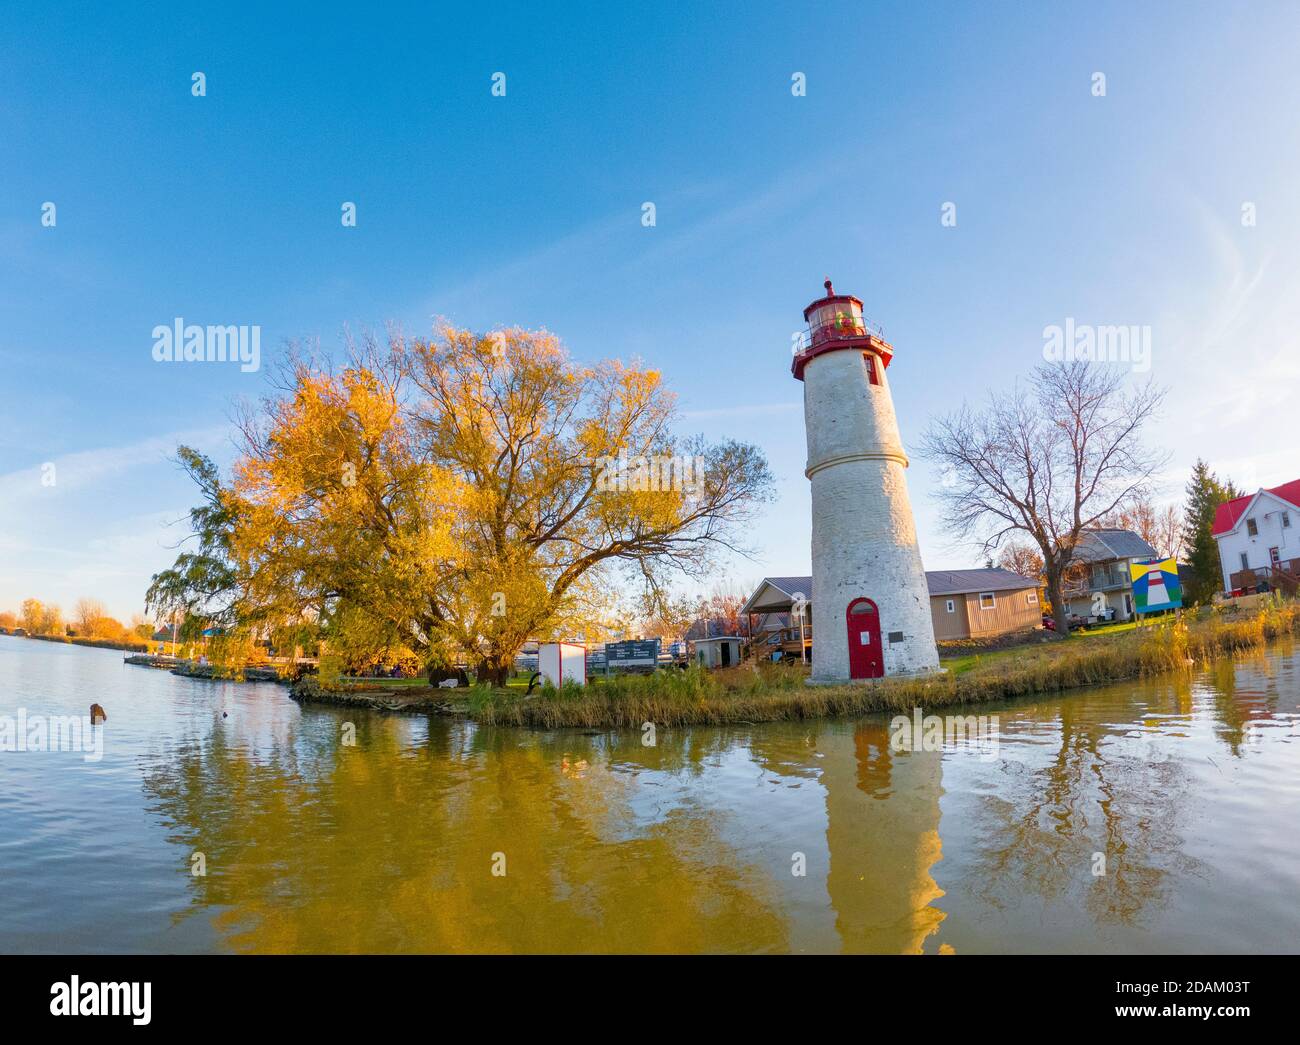 This 200 years old lighthouse is located at the mouth of Thames River and Lake St. Clair, Ontario, Canada Stock Photo